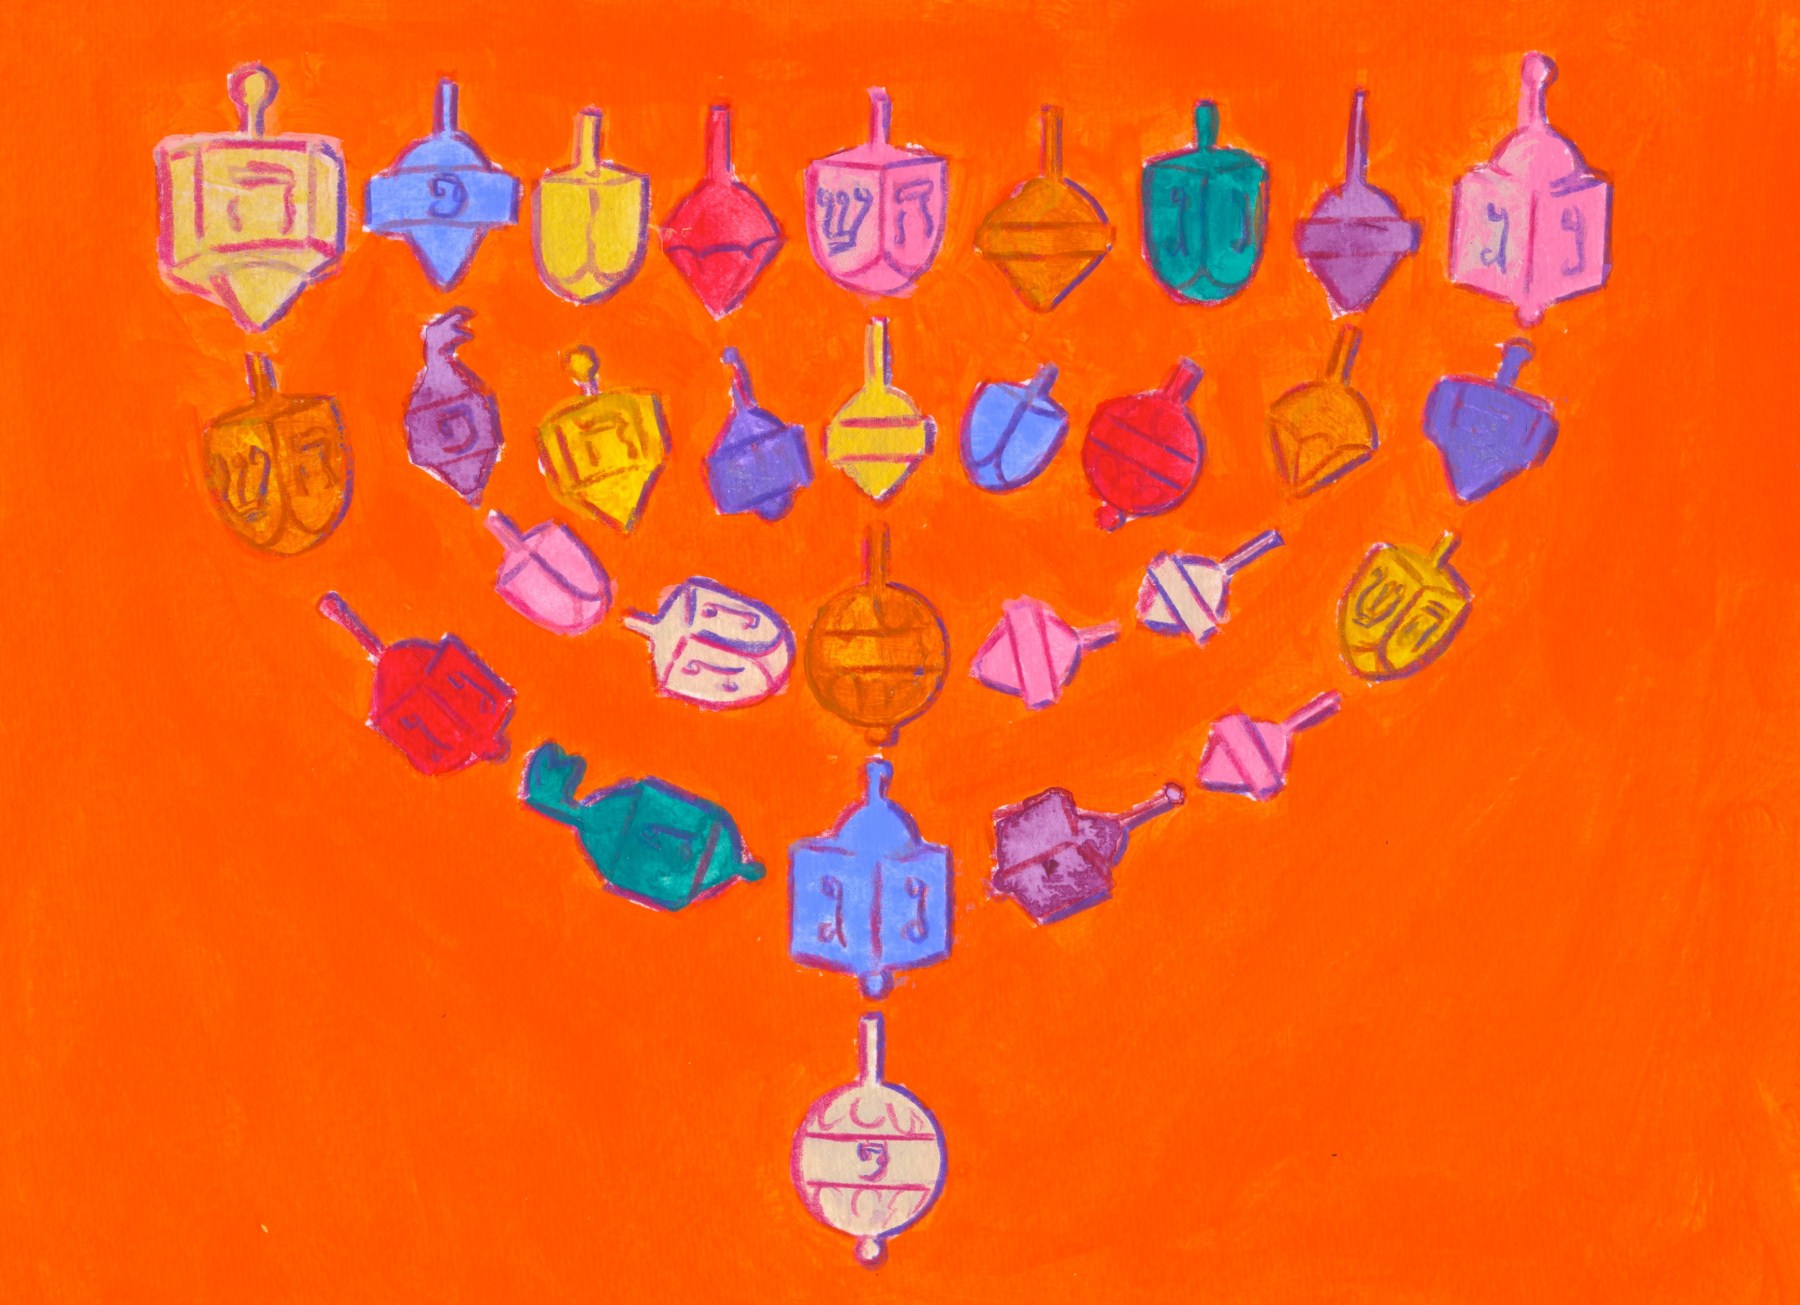 Mark Podwal, Dreidel Menorah, 2013, acrylic and colored pencil on paper, 9 x 12 inches